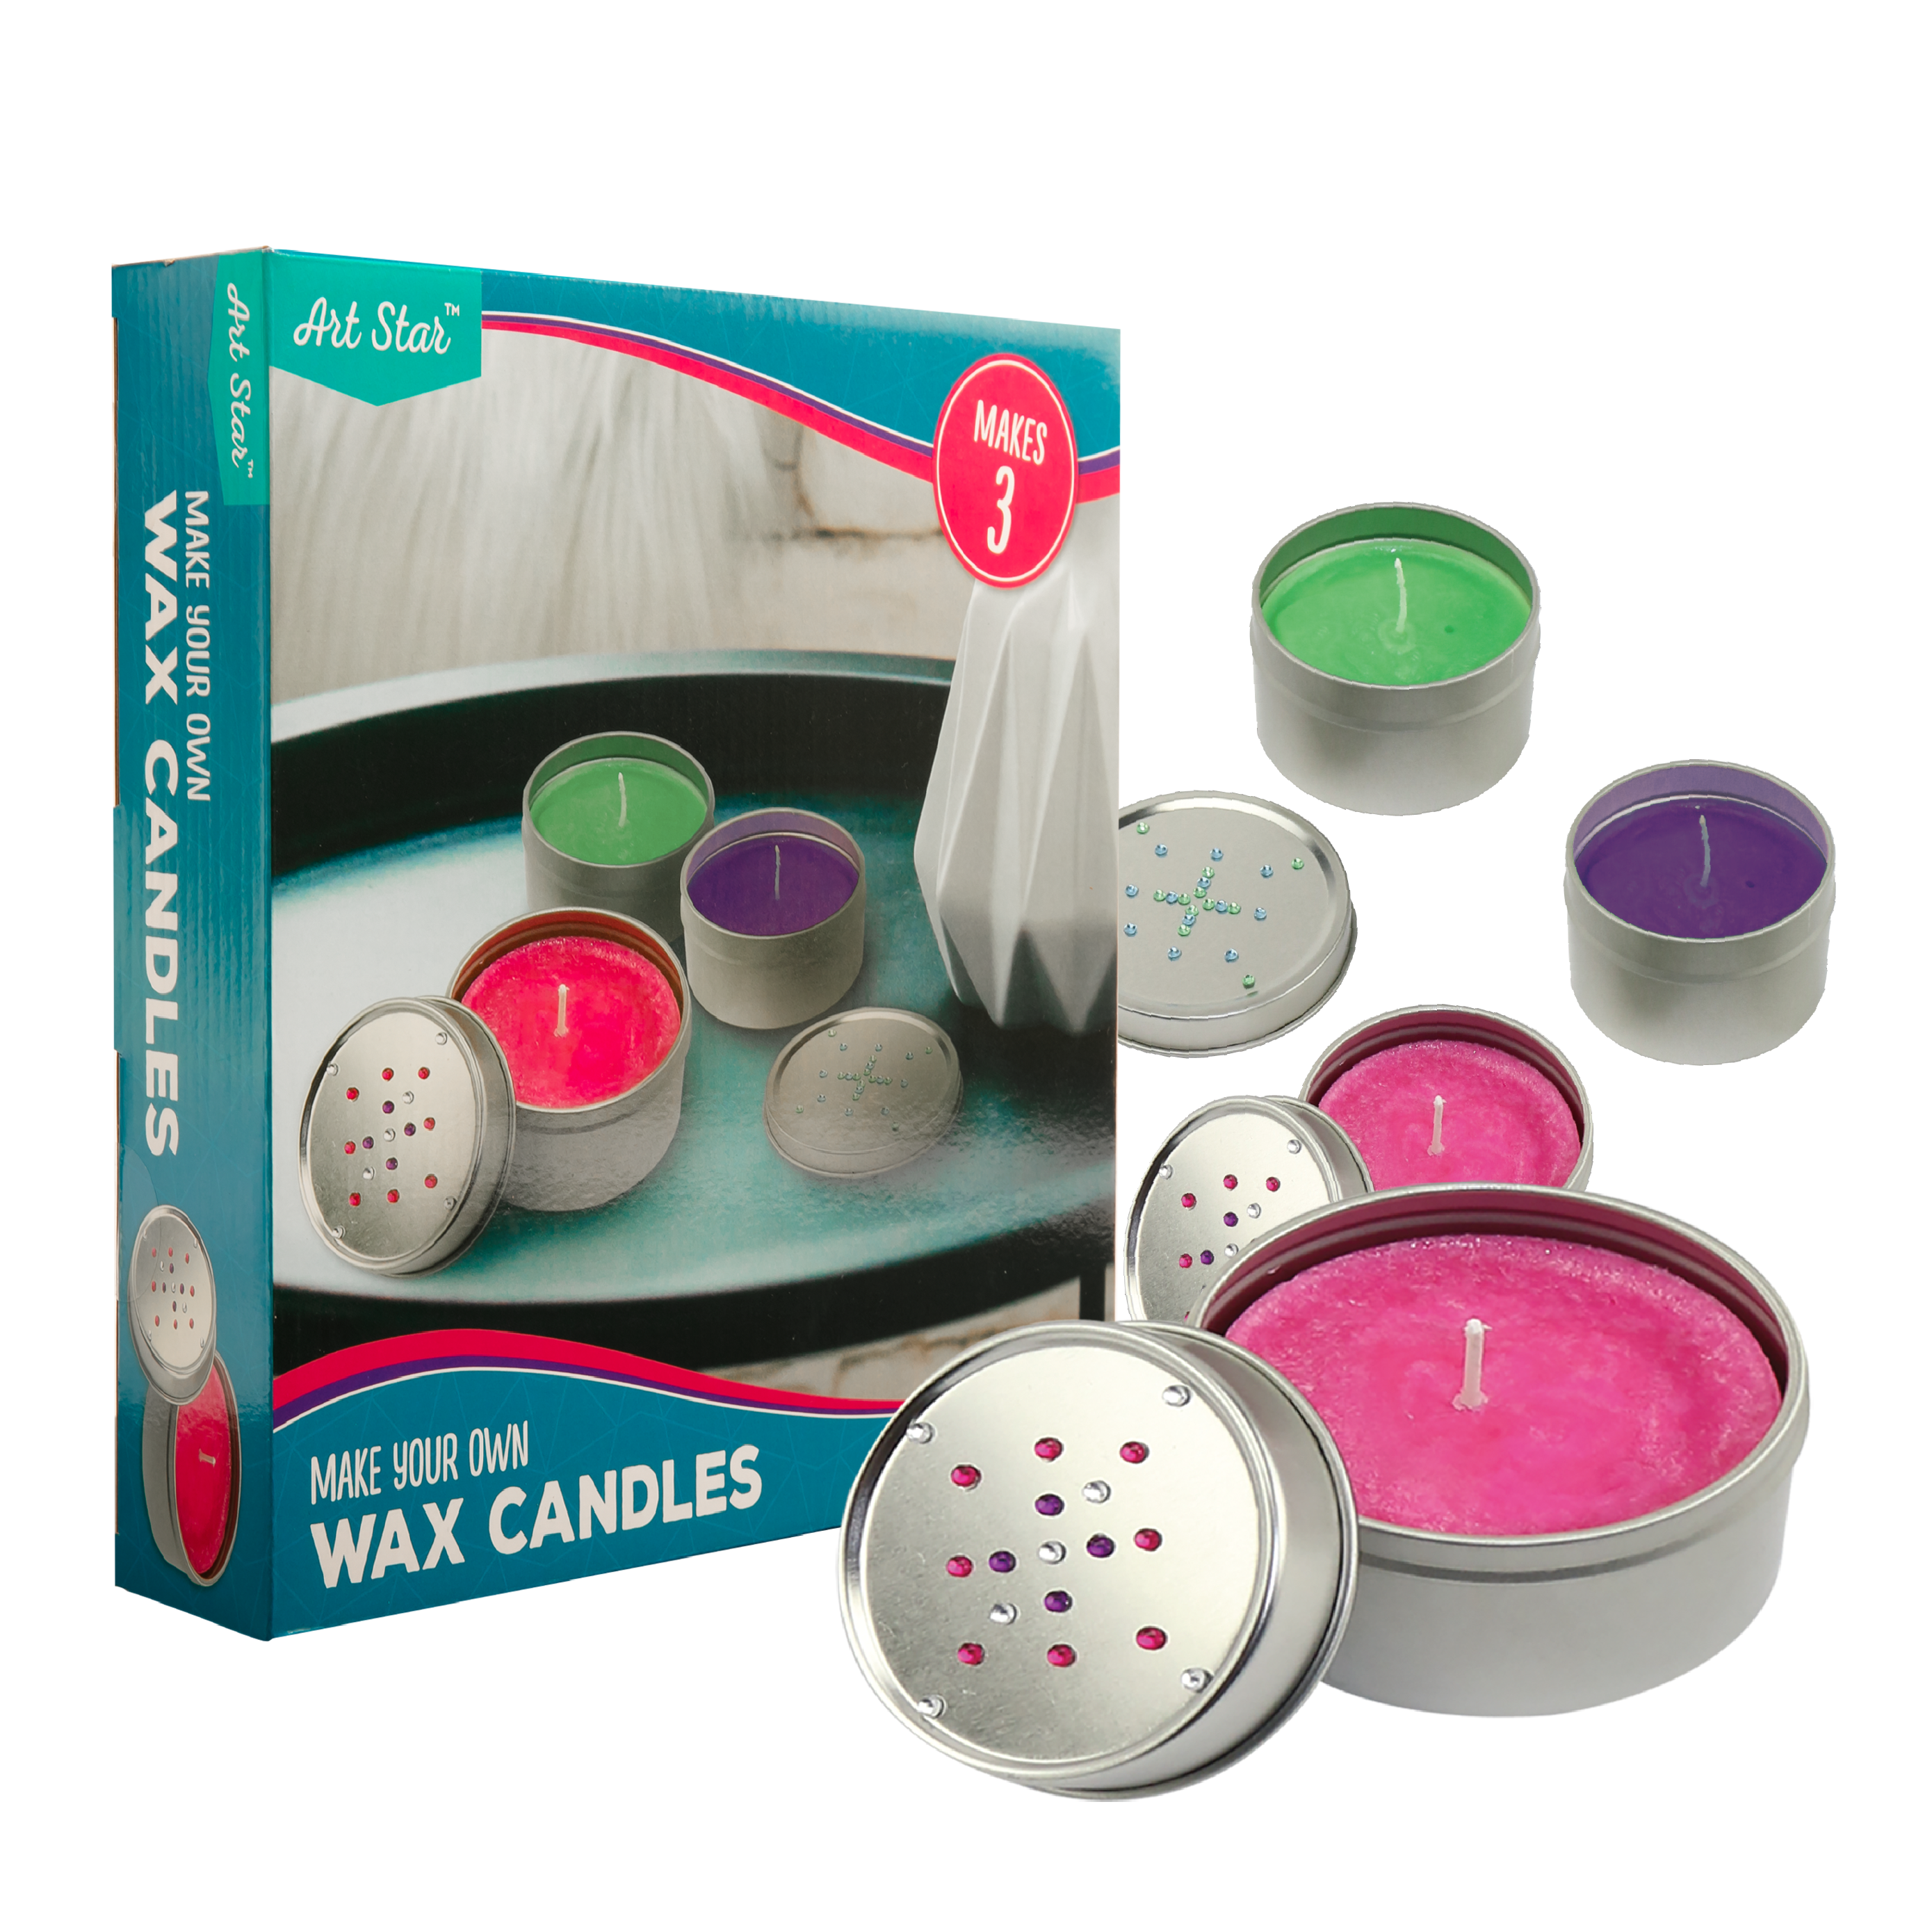 Image of Art Star Make Your Own Wax Candle Tins (Makes 3)